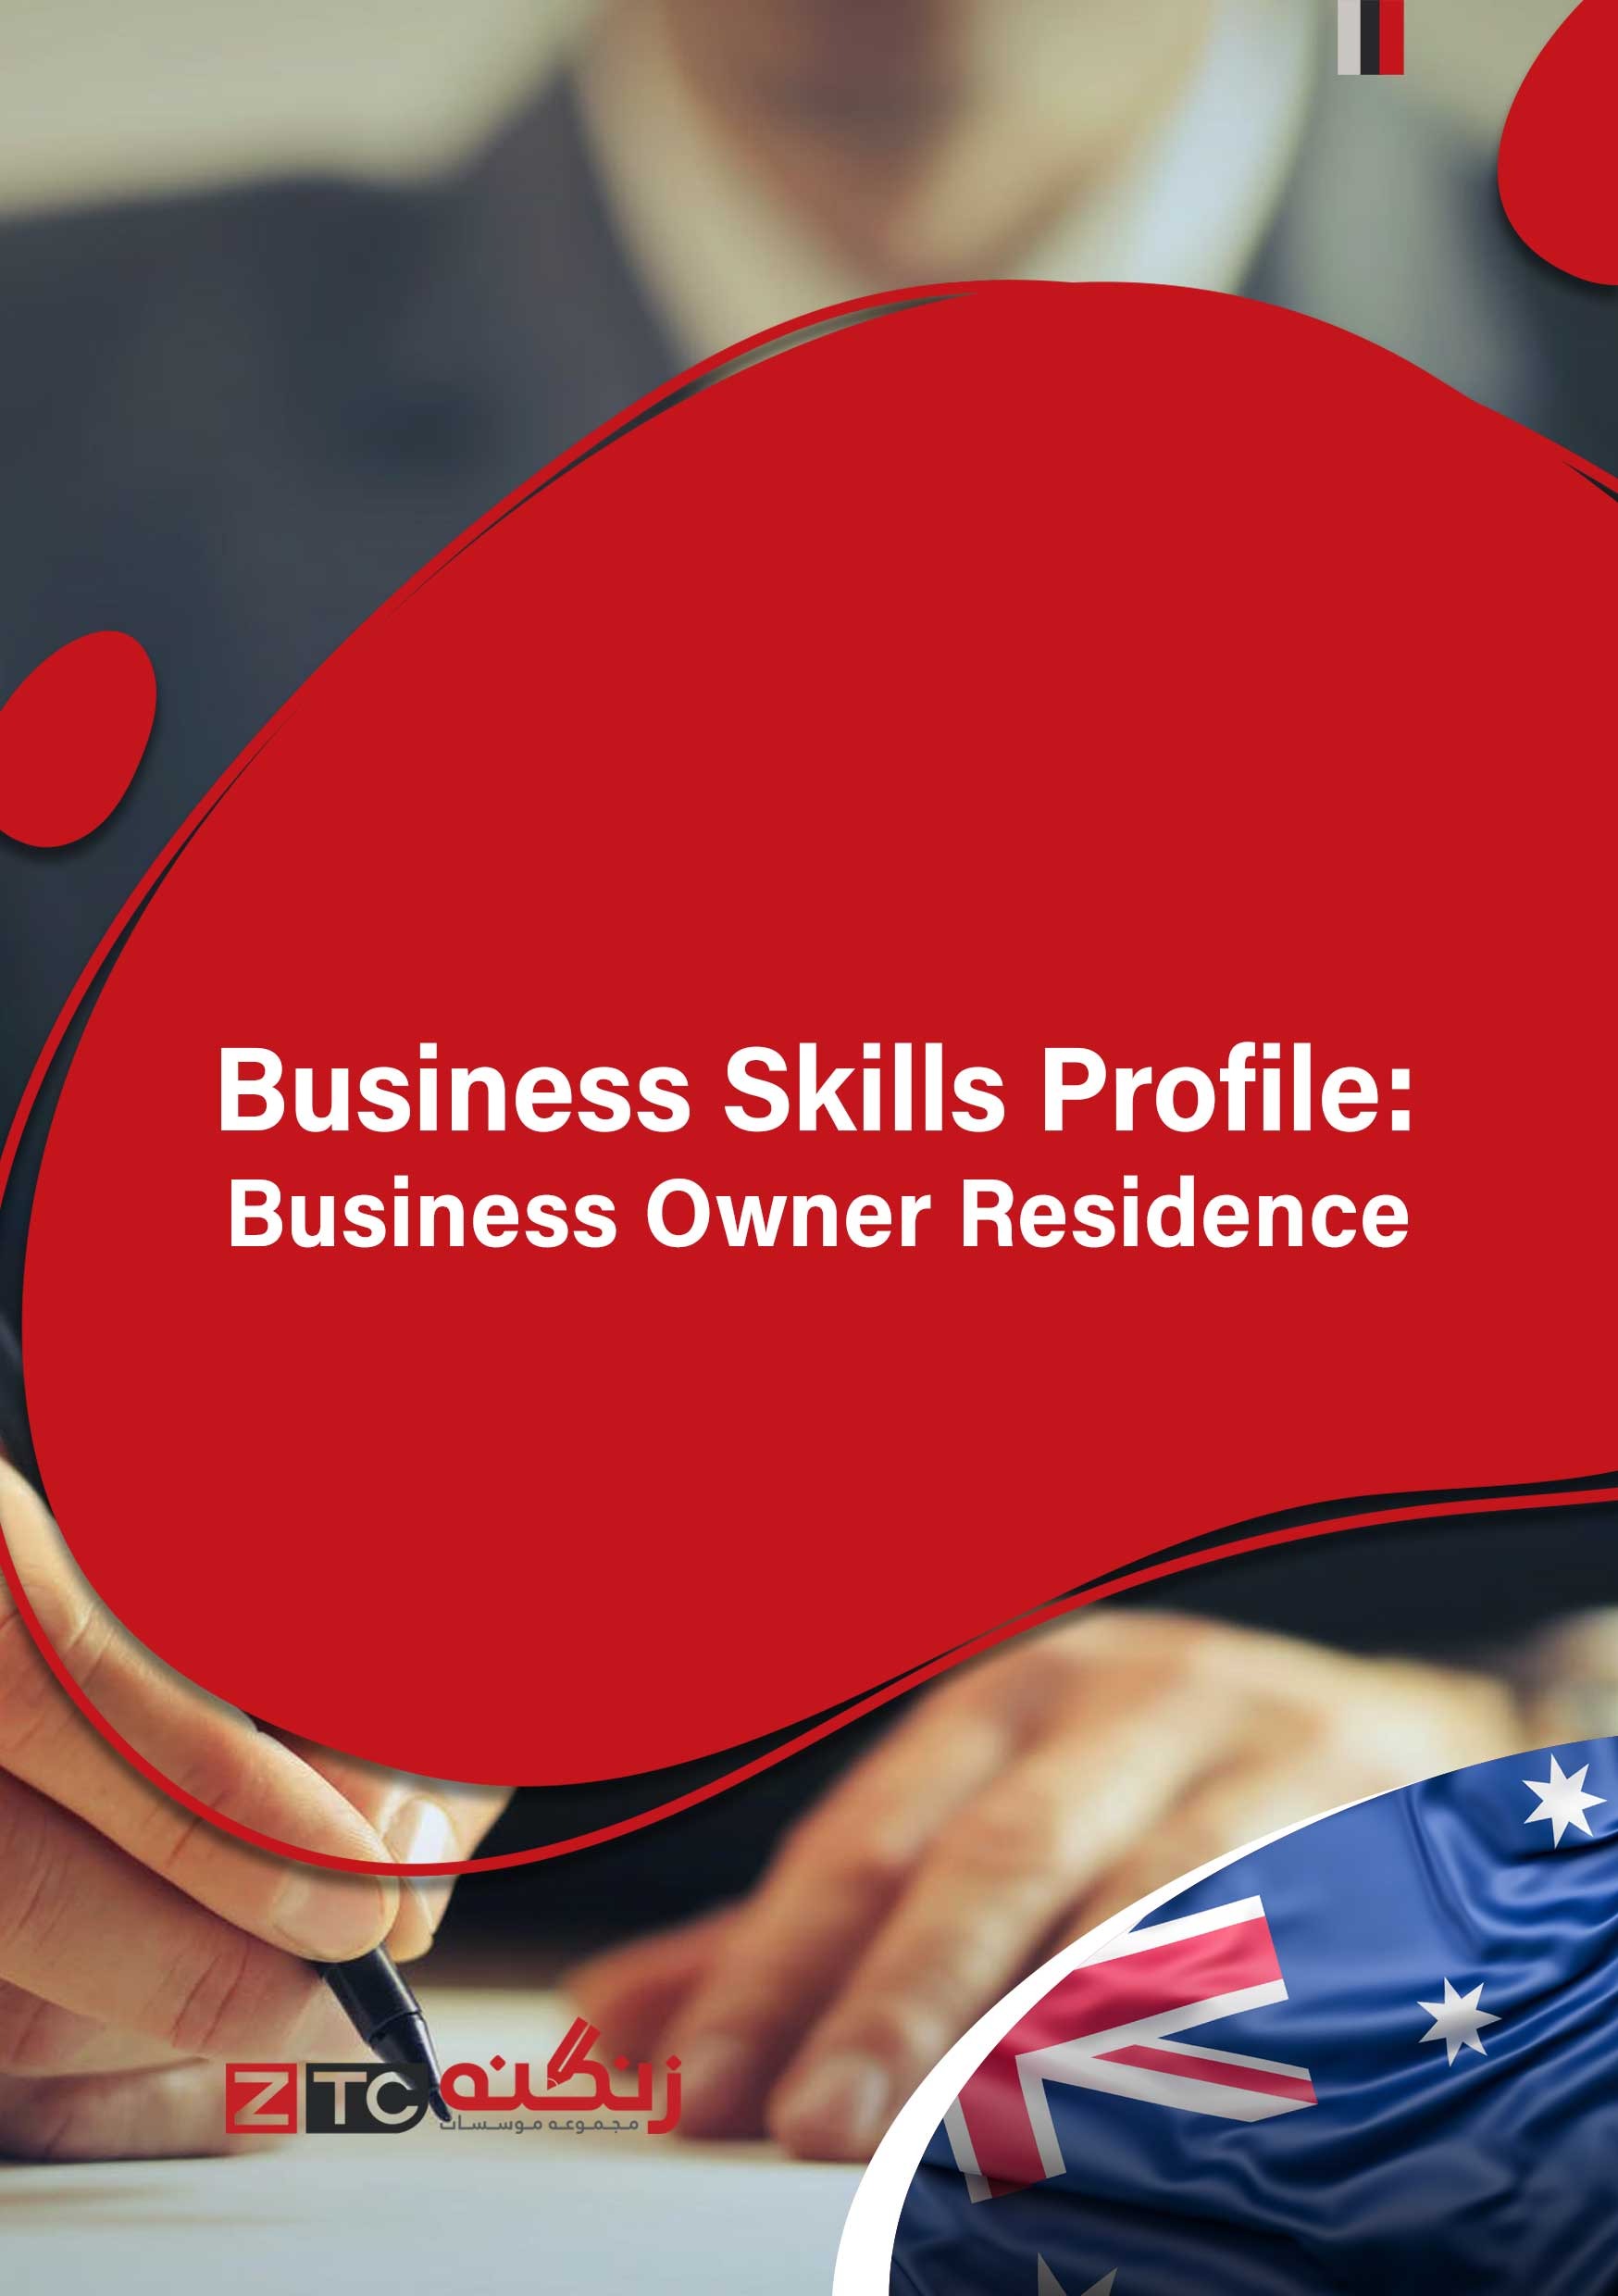 Business Skills Profile - Business Owner Residence